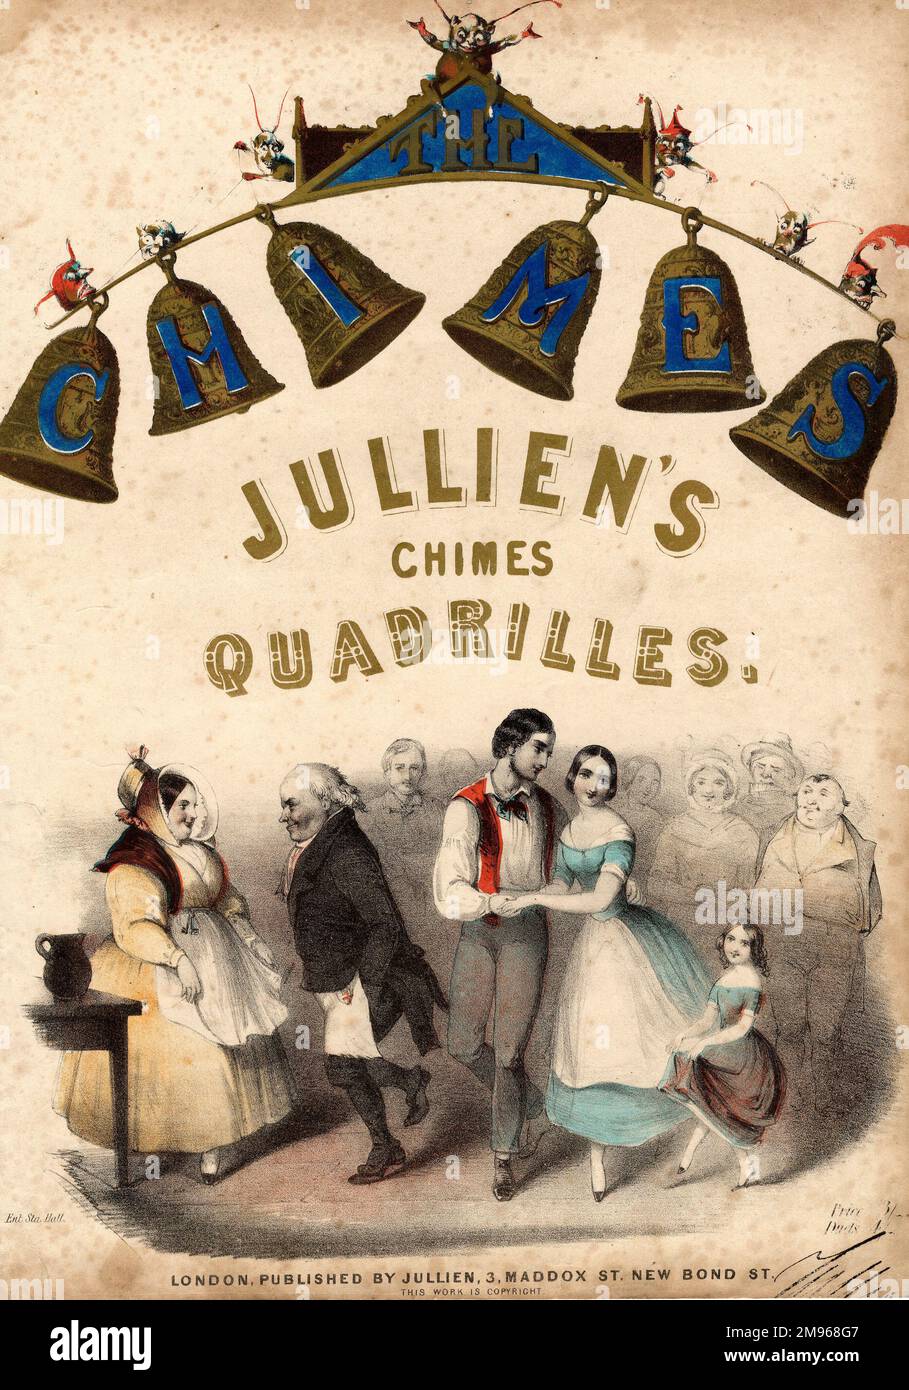 Cover design for a music sheet containing the French conductor Louis Antoine Jullien's Chimes Quadrilles, building on the success of Charles Dickens' second Christmas book, The Chimes, first published in 1844.  A typical Dickensian scene is depicted, with people dancing and making merry during the festive season.  There is a set of six large bells at the top, with goblins perched on them and looking down at the people. Stock Photo